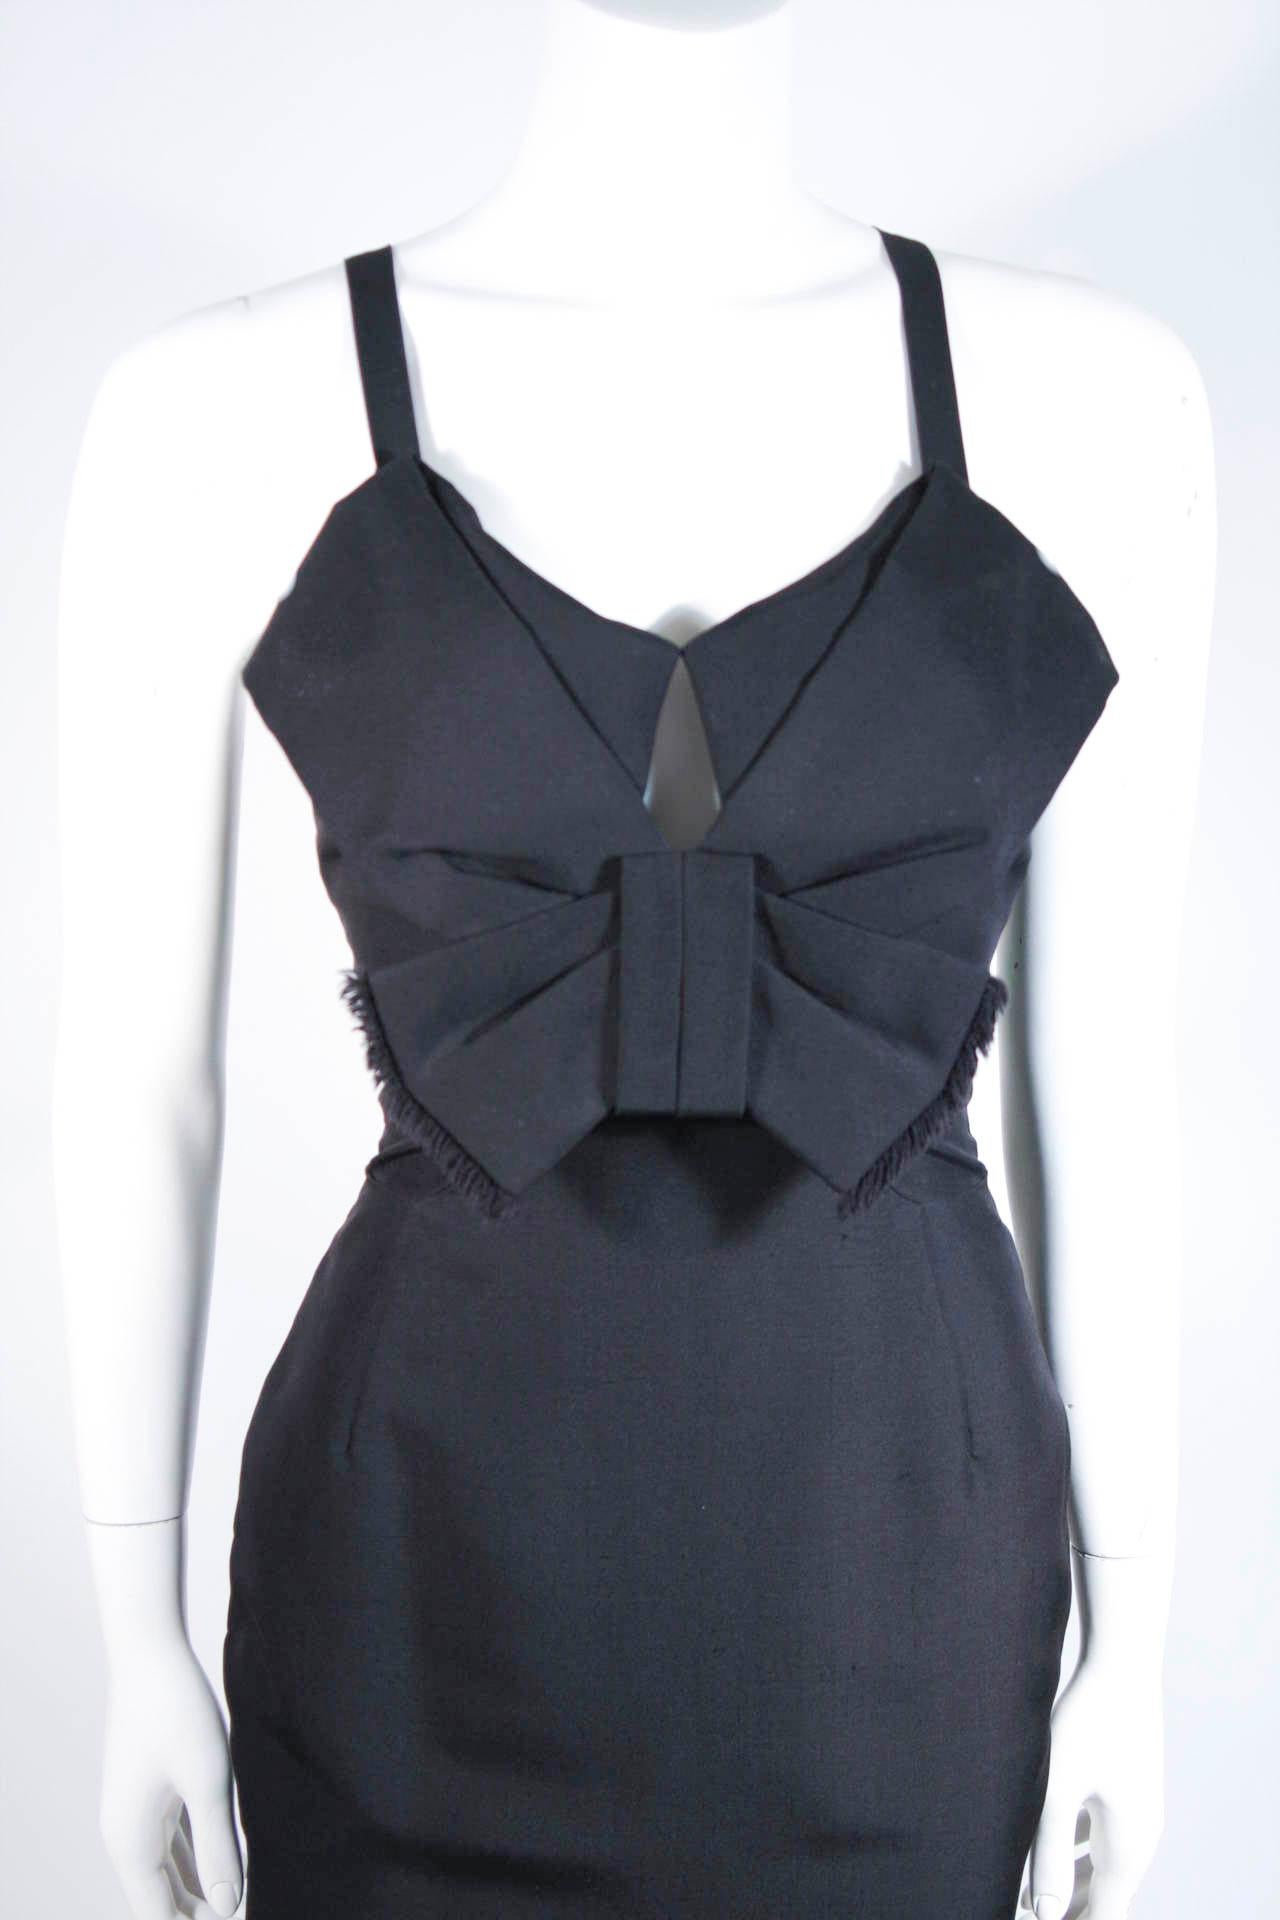 Fashioned from the finest black Silk Dupioni, this exquisite cocktail dress features a gorgeous body skimming silhouette. There is a peek-a-boo accent and large bow detail at the bust with a raw edge. Such a fabulous and chic design.

This is a